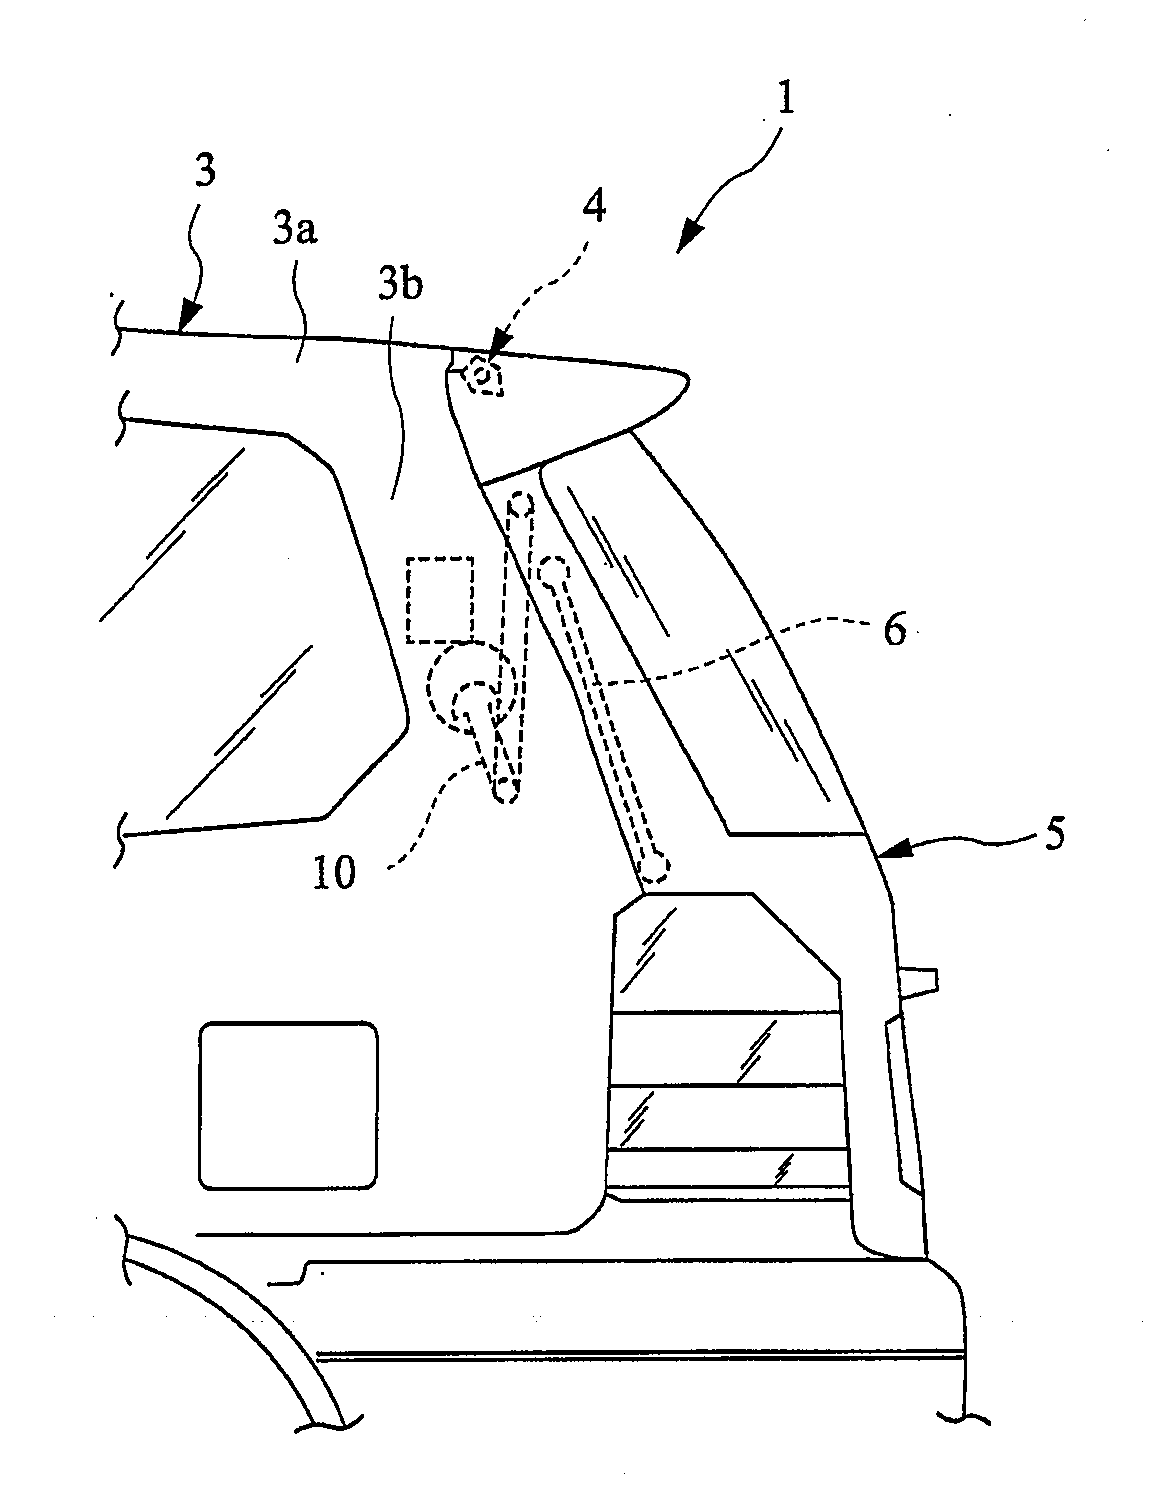 Electric opening/closing device for vehicle